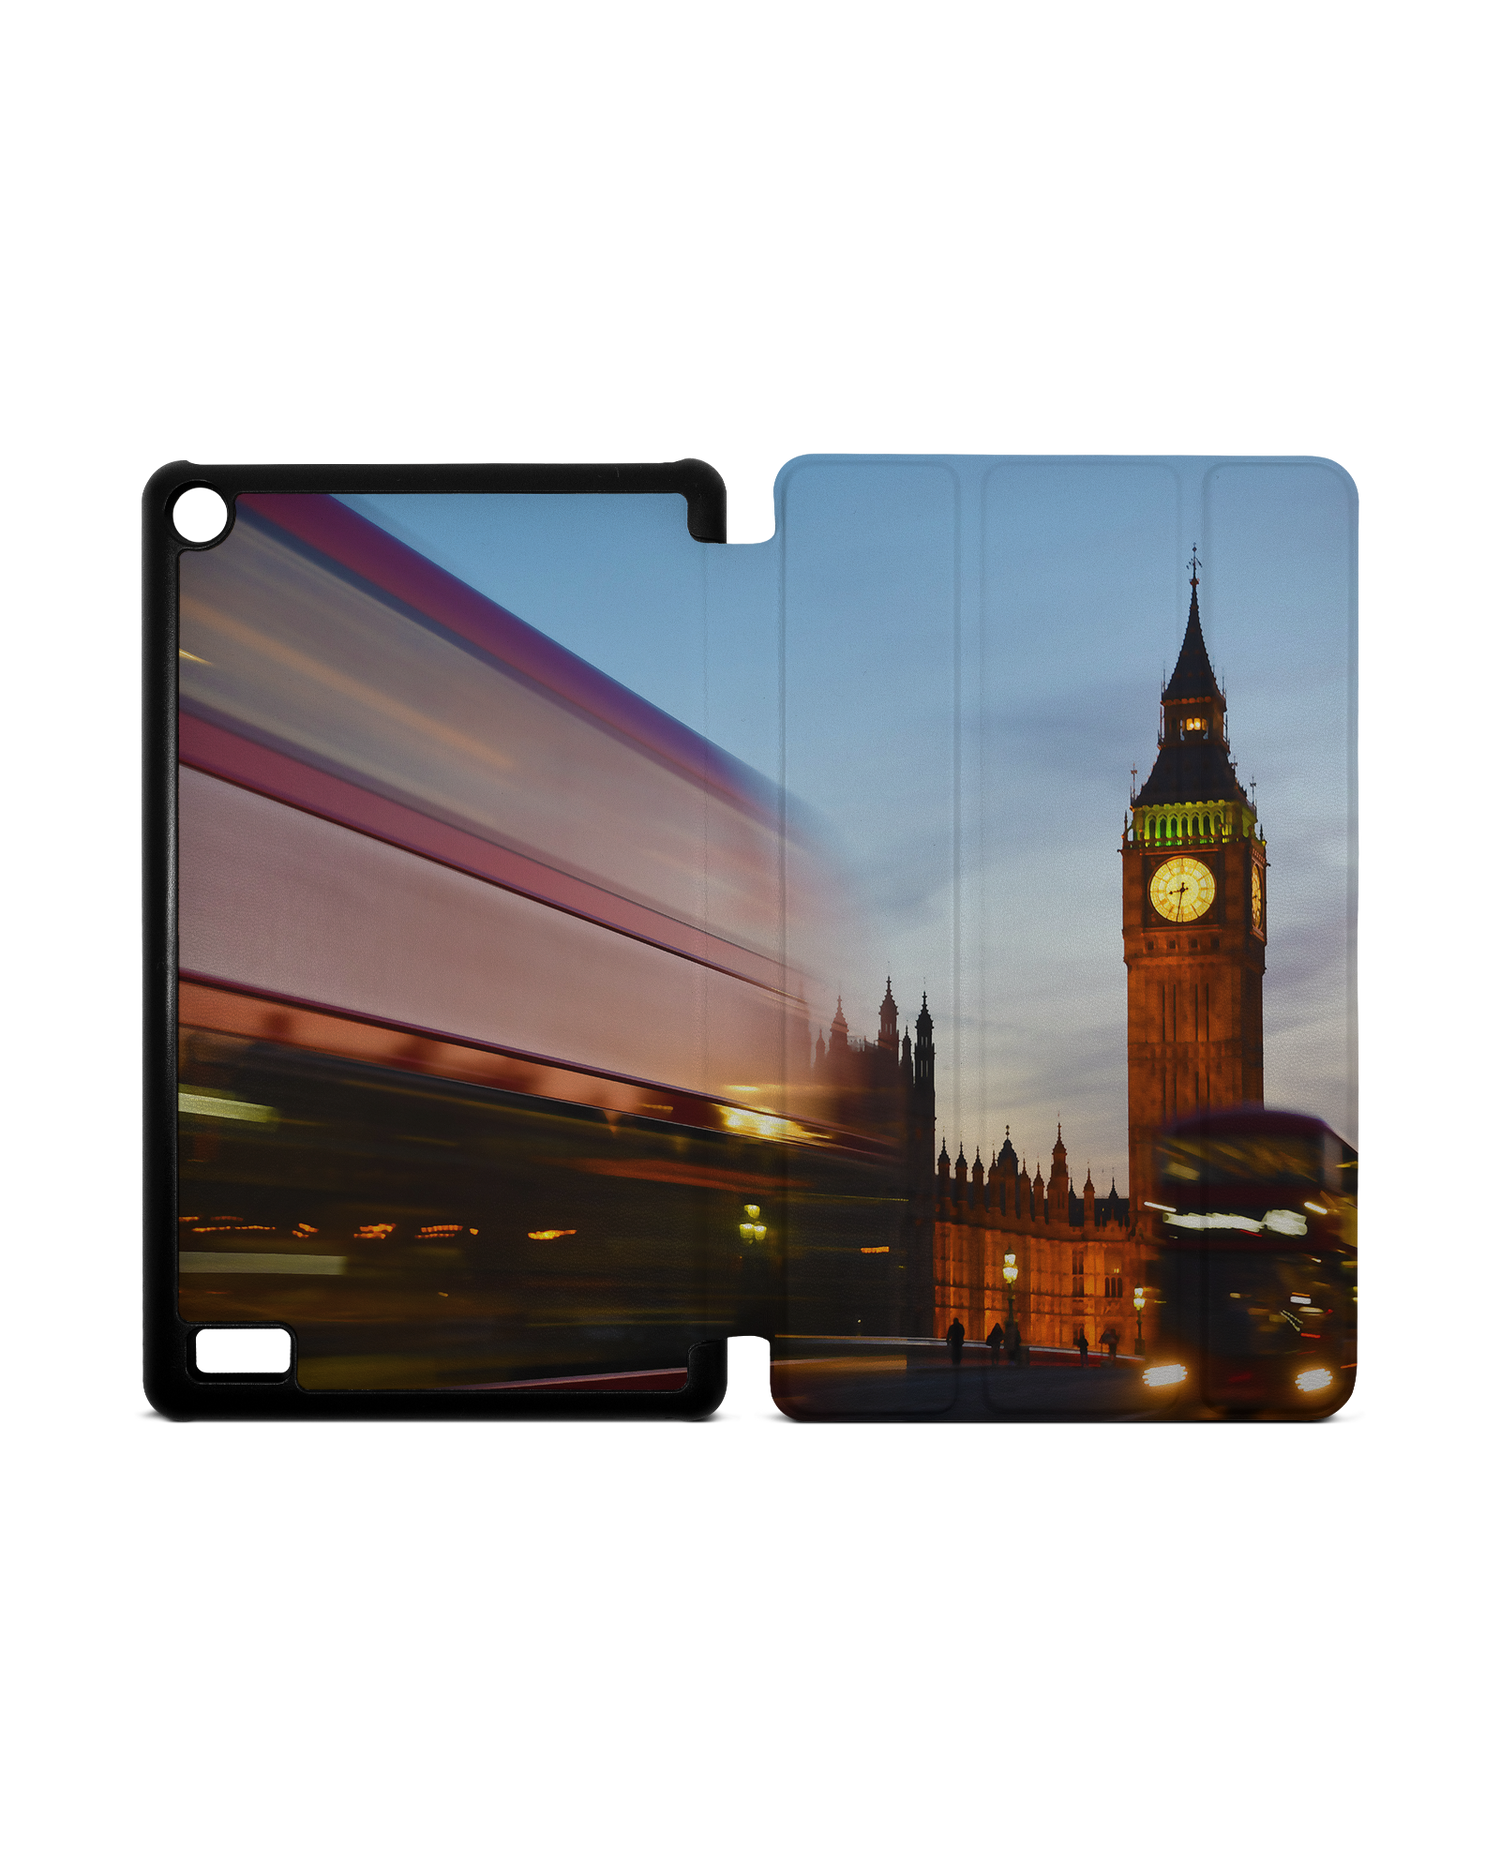 London Tablet Smart Case for Amazon Fire 7: Opened